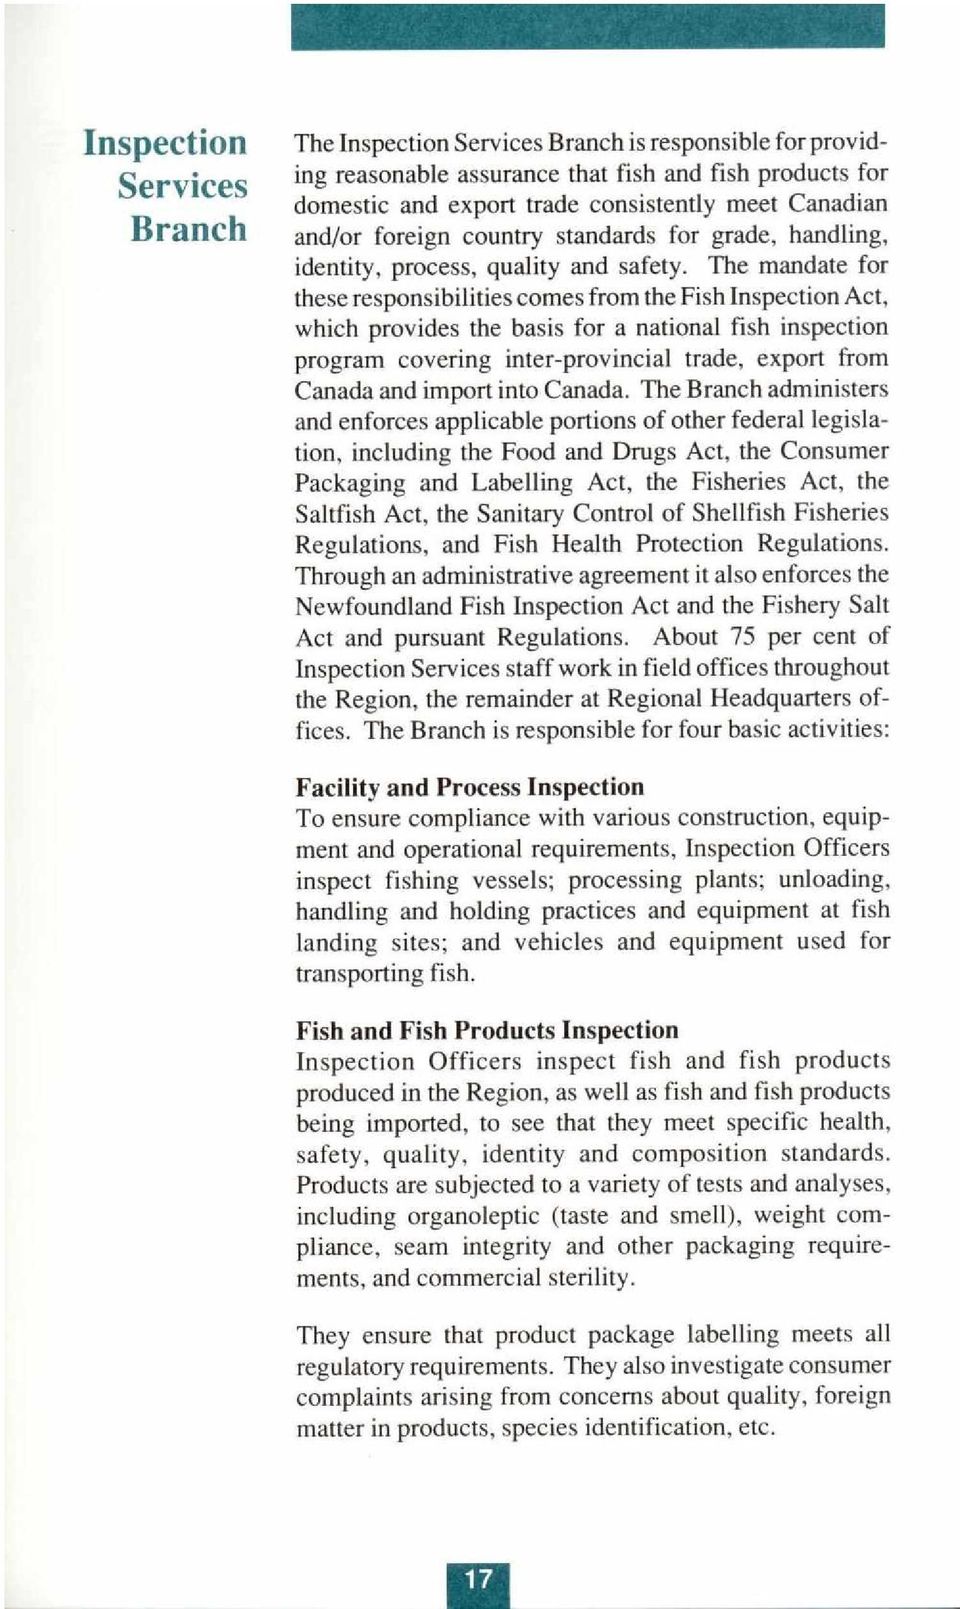 The mandate for these responsibilities comes from the Fish Inspection Act, which provides the basis for a national fish inspection program covering inter-provincial trade, export from Canada and